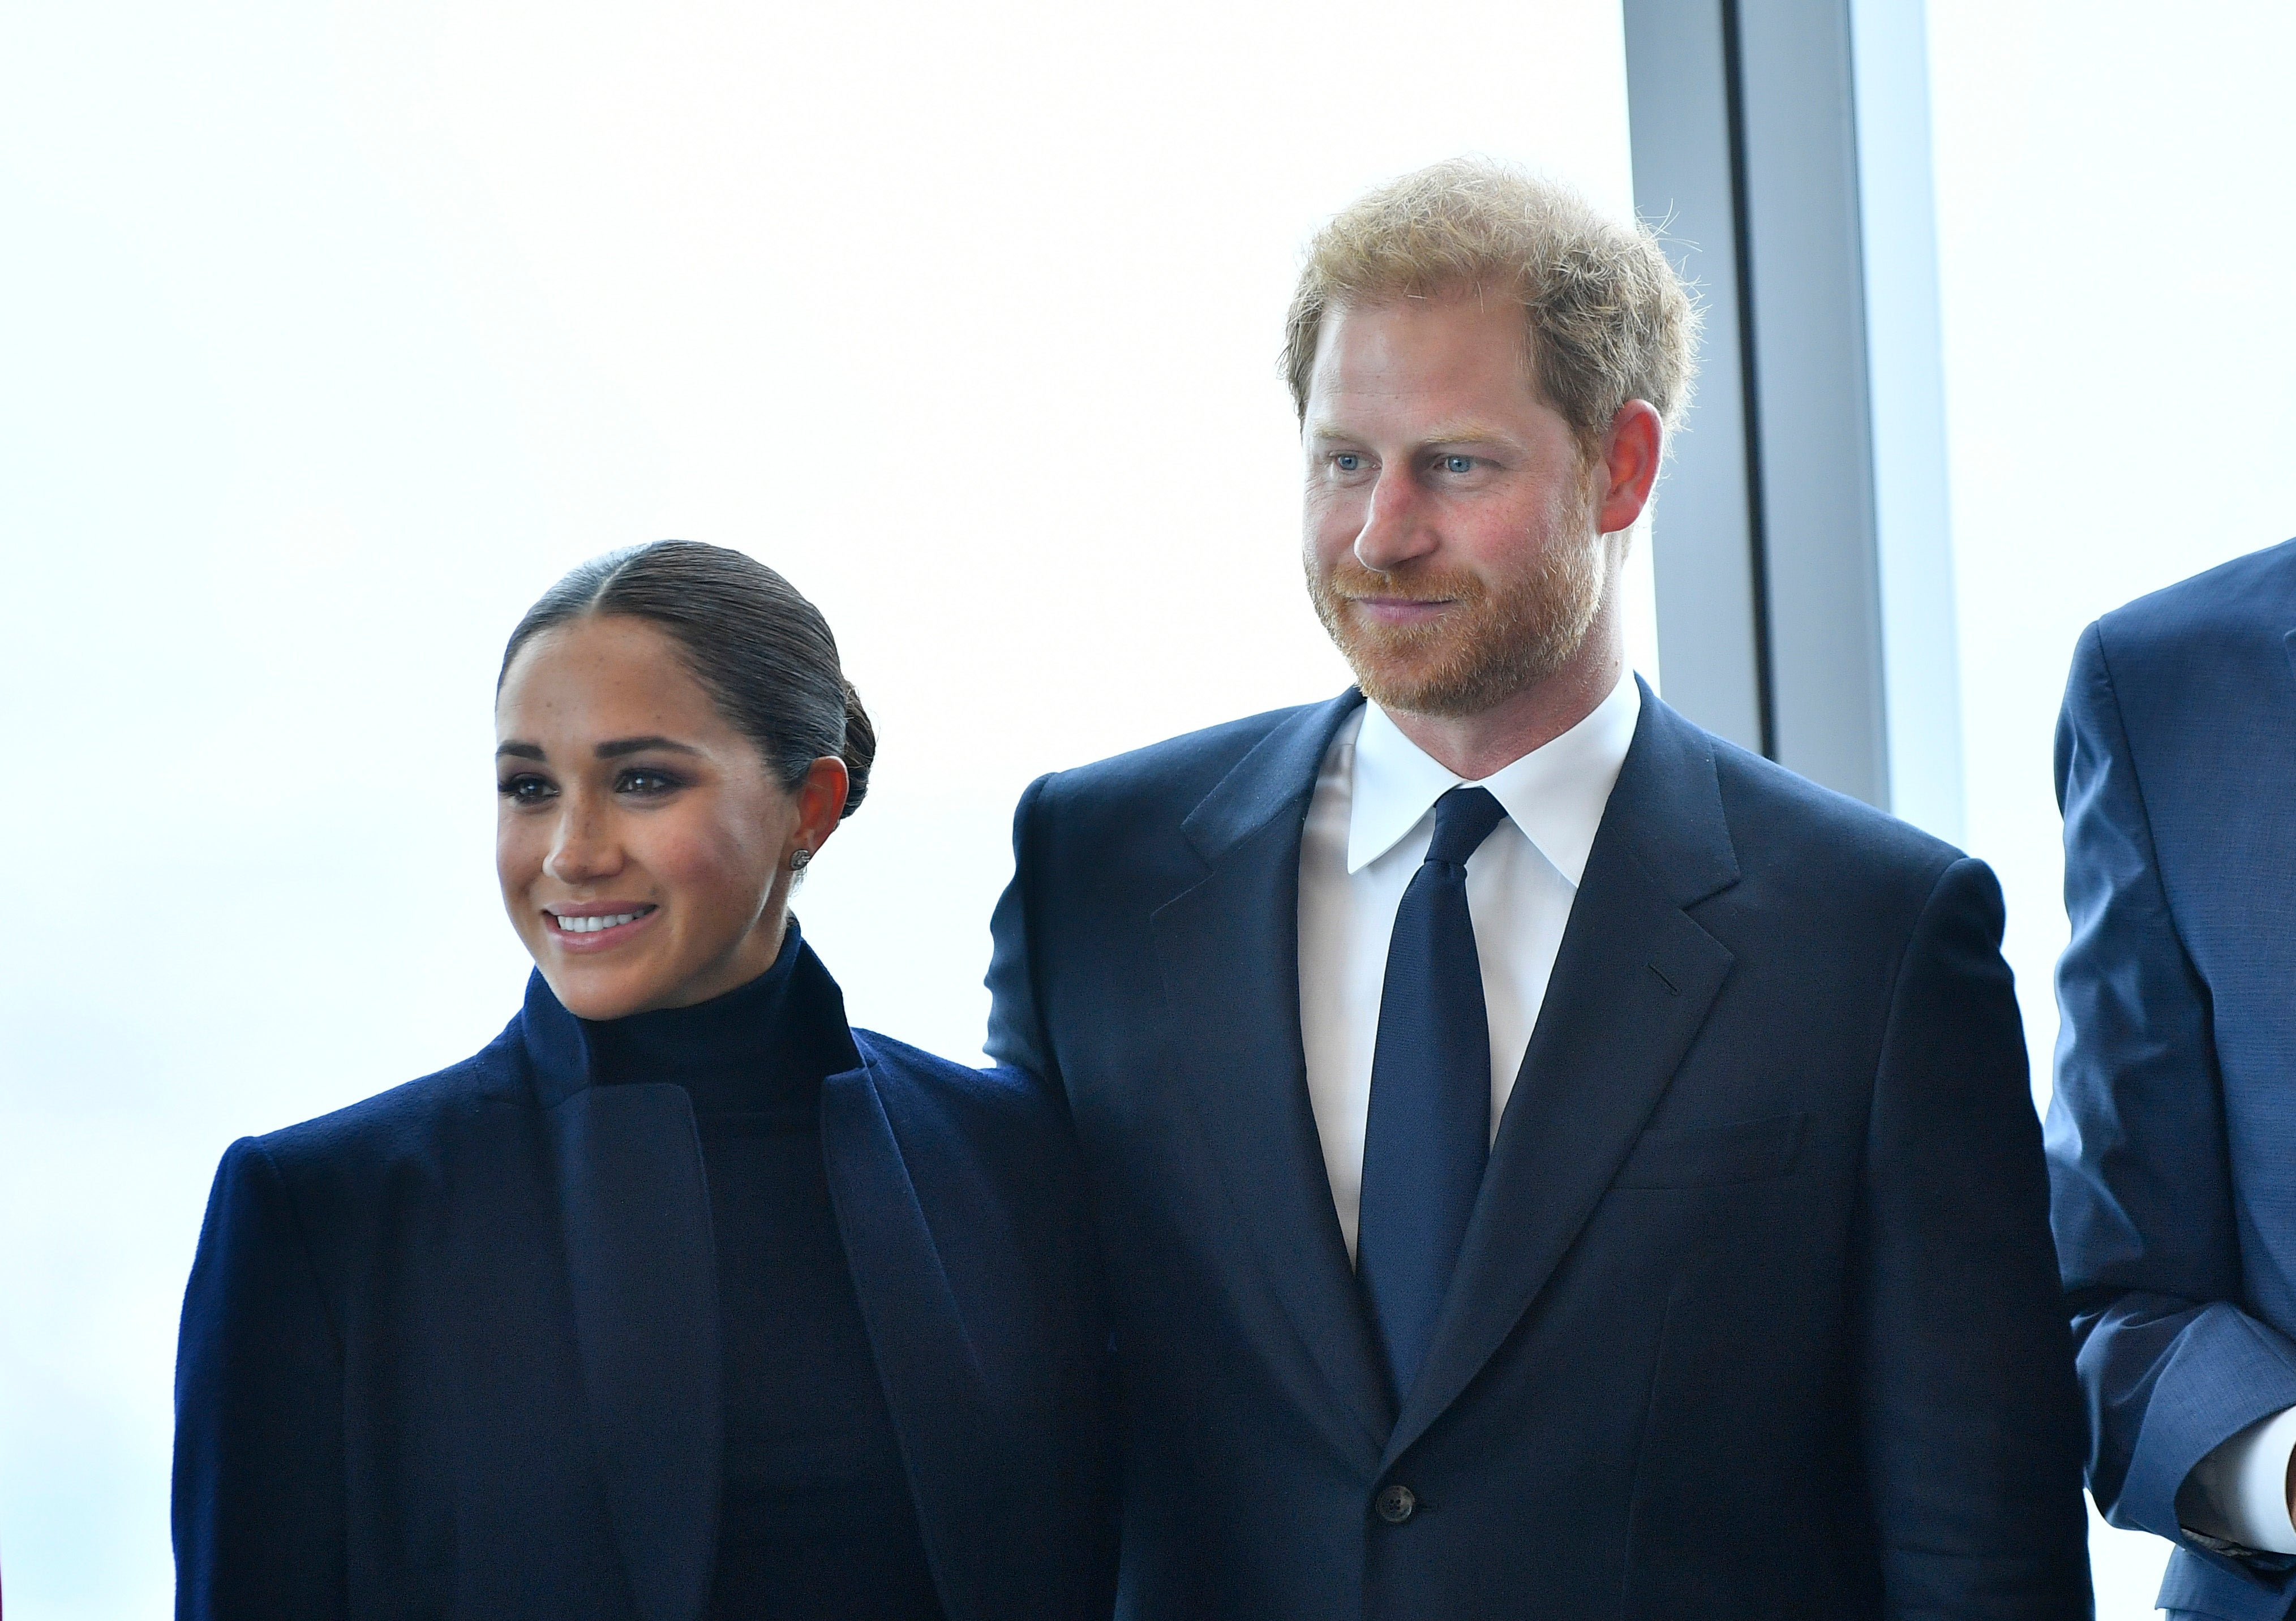 Harry and Meghan visited One World Observatory during their trip